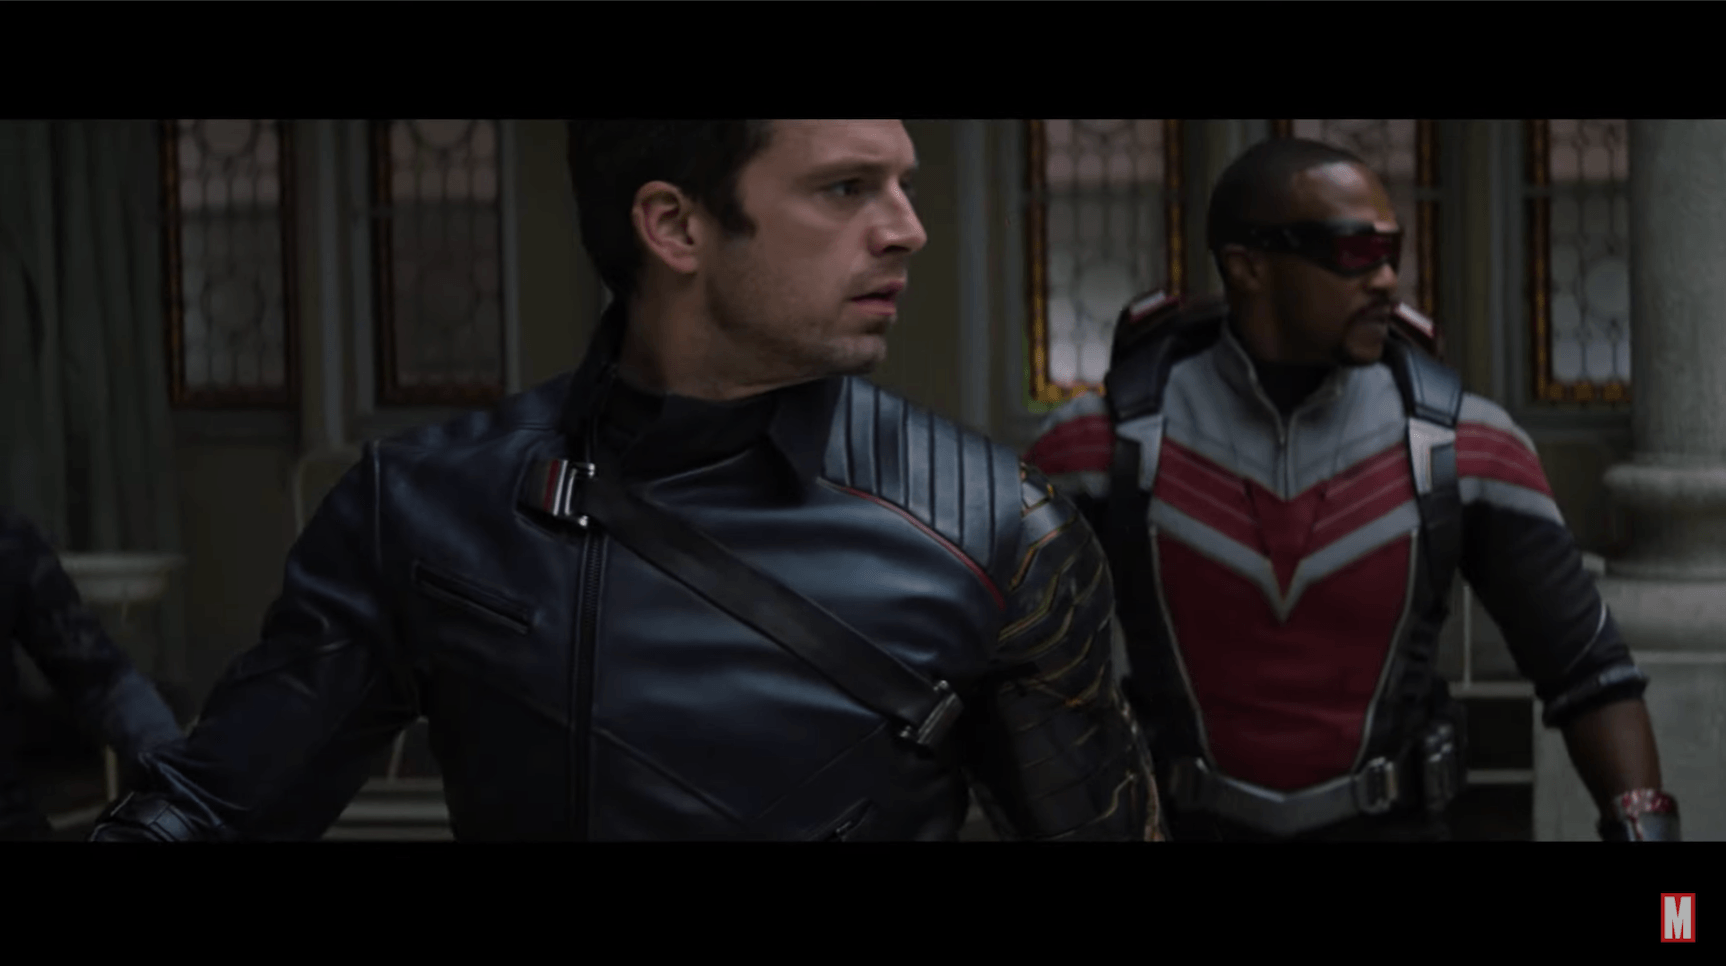 Marvel’s ‘The Falcon and The Winter Soldier’ Premieres Friday: Watch the New Trailer Now